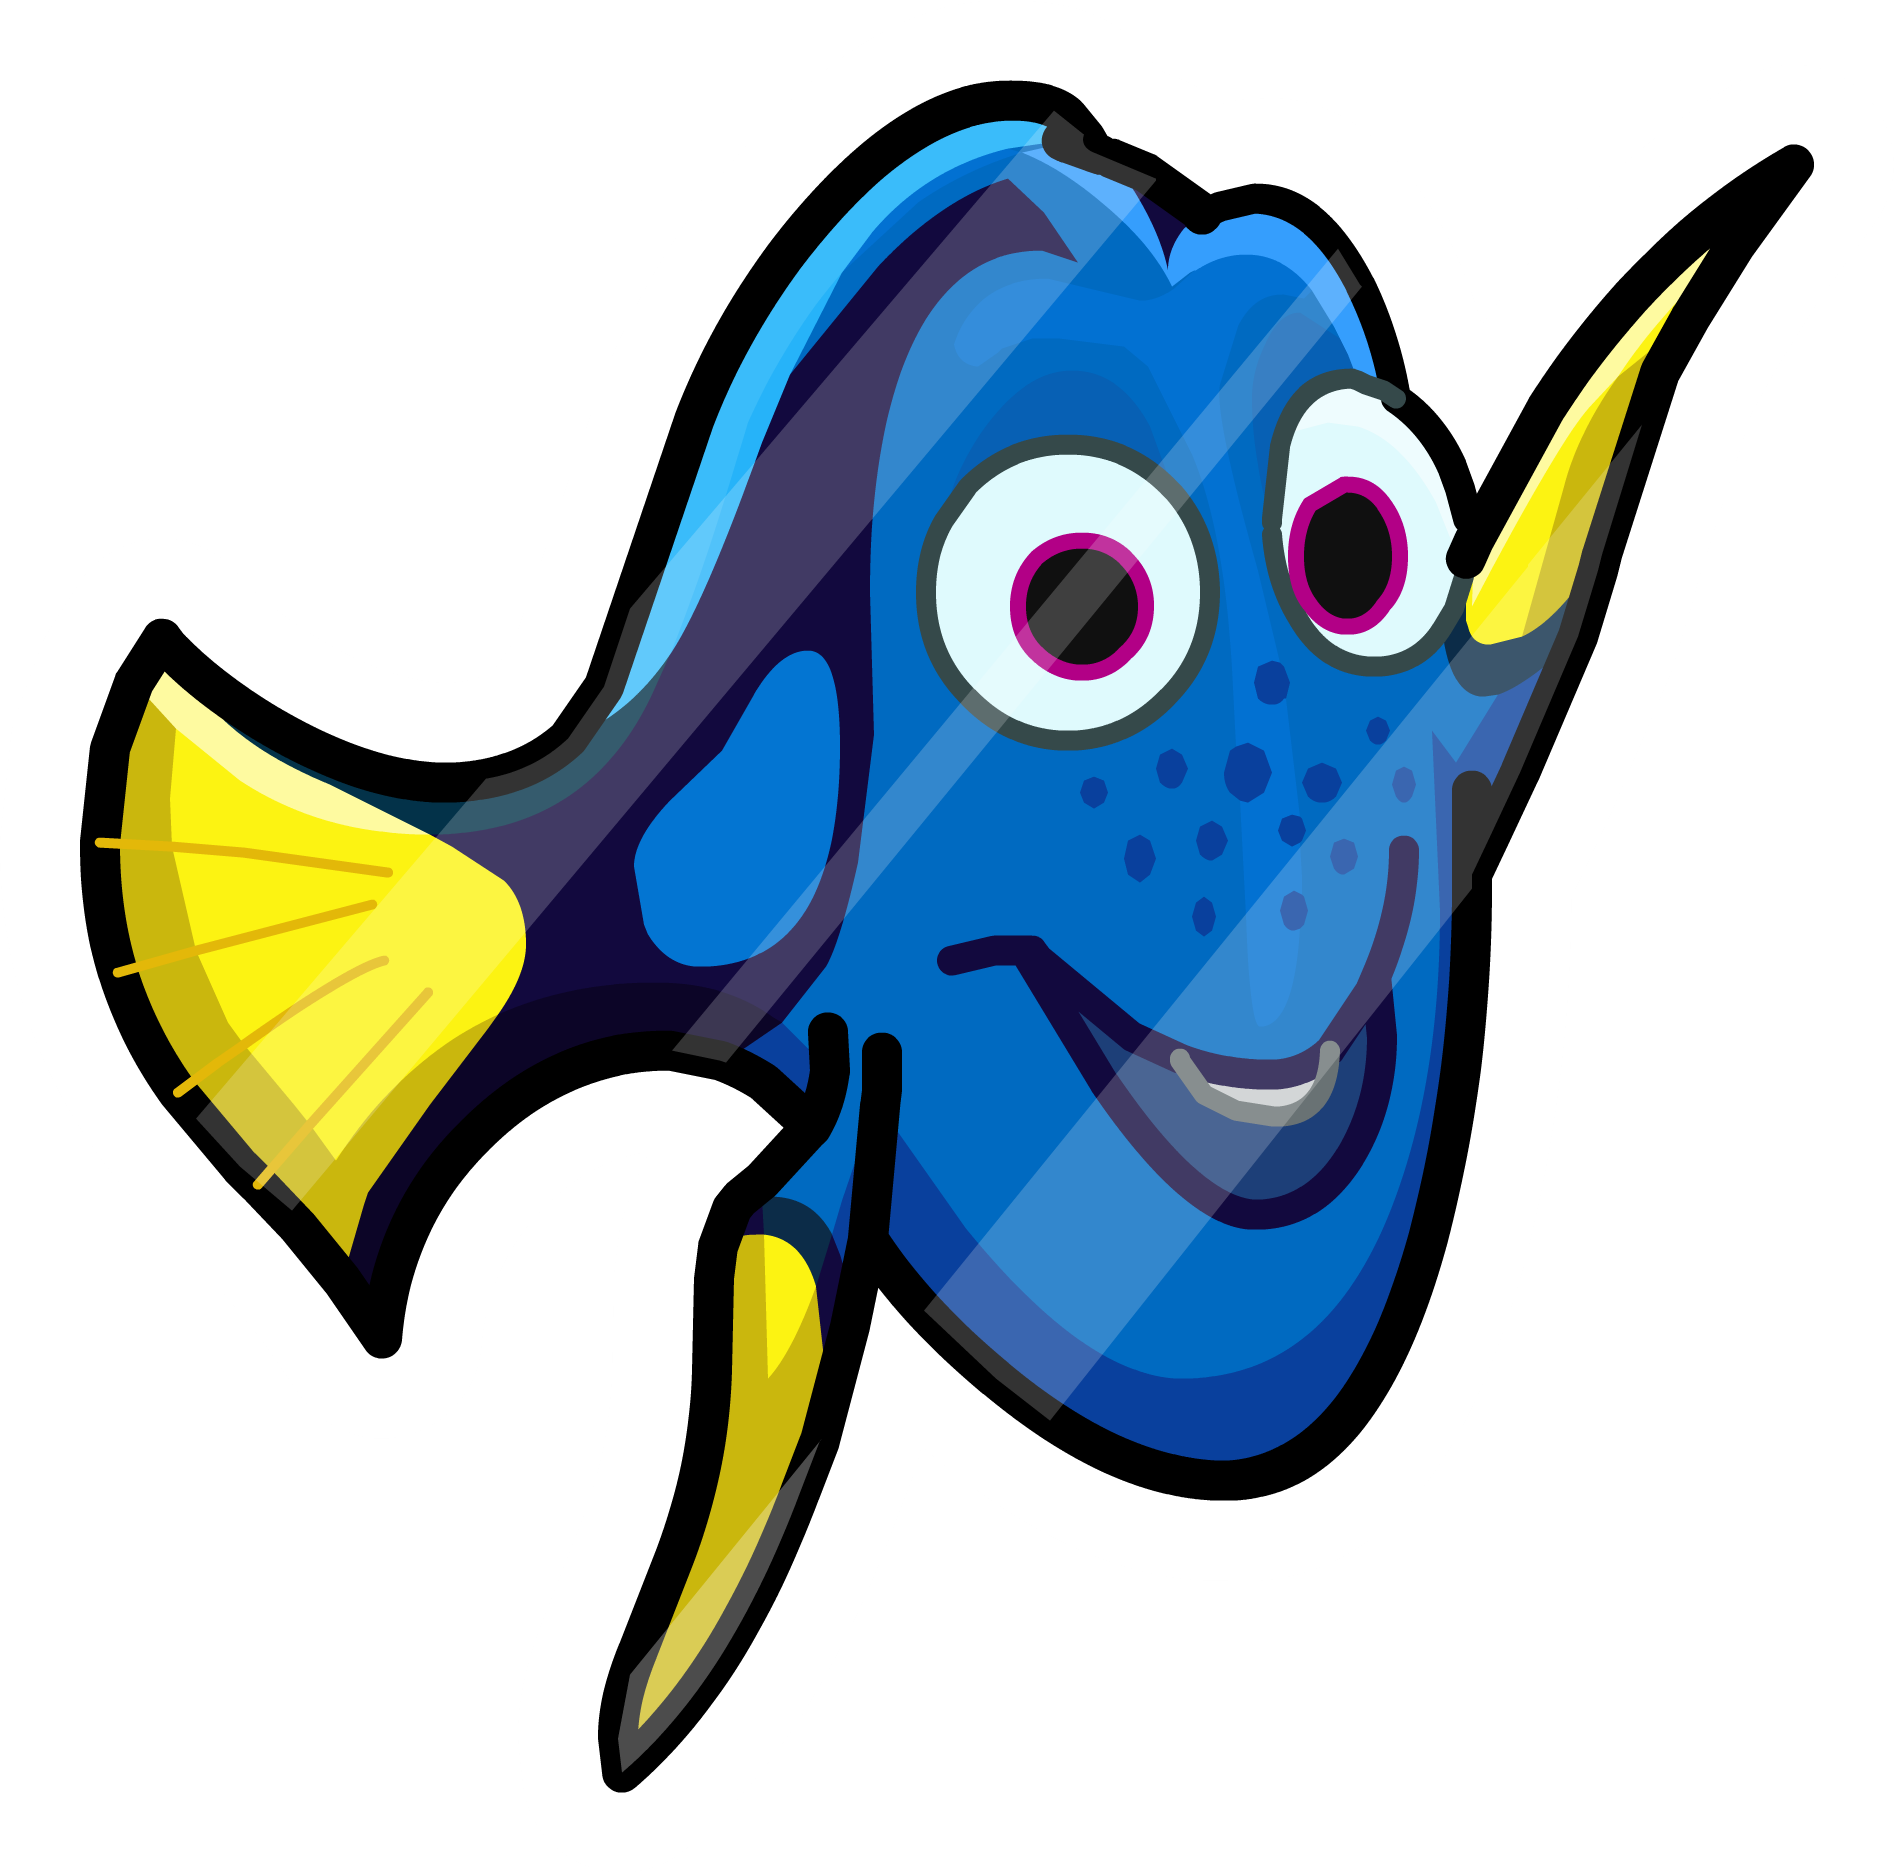 Finding Dory Pin | Club Penguin Wiki | FANDOM powered by Wikia